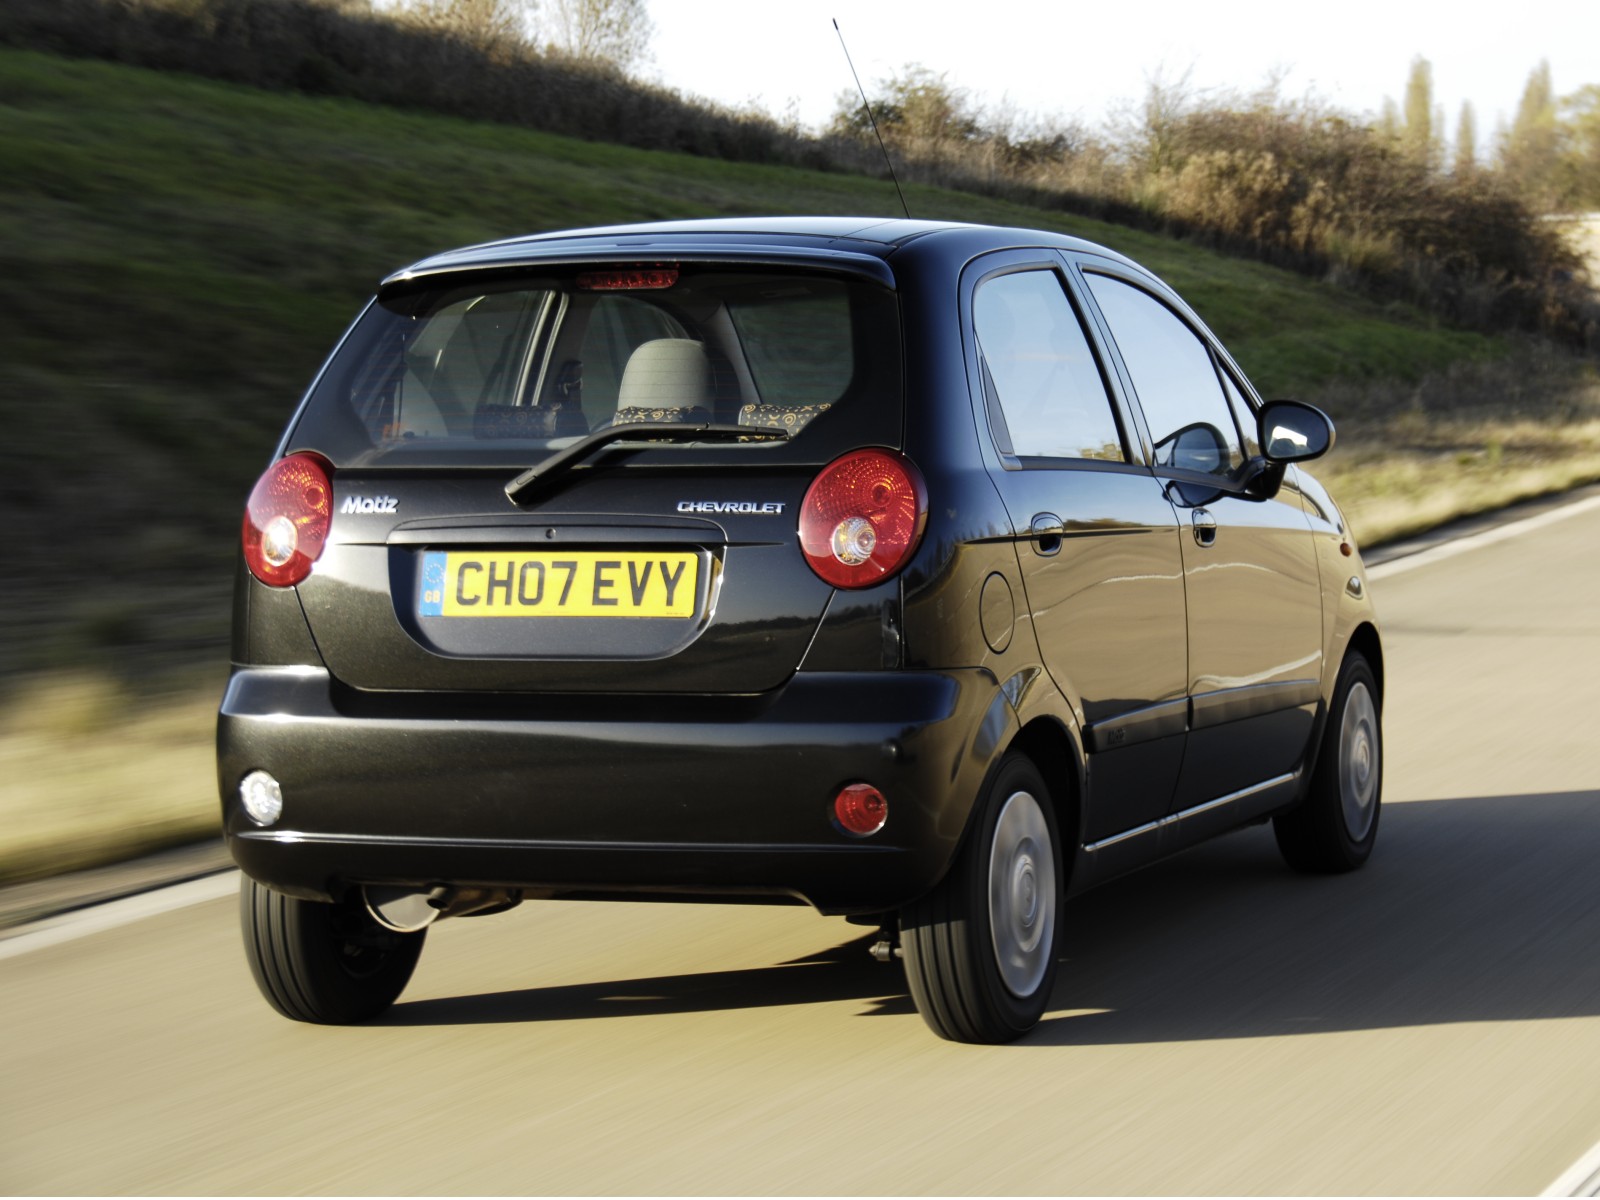 Chevrolet Matiz 2009 Review, Amazing Pictures and Images